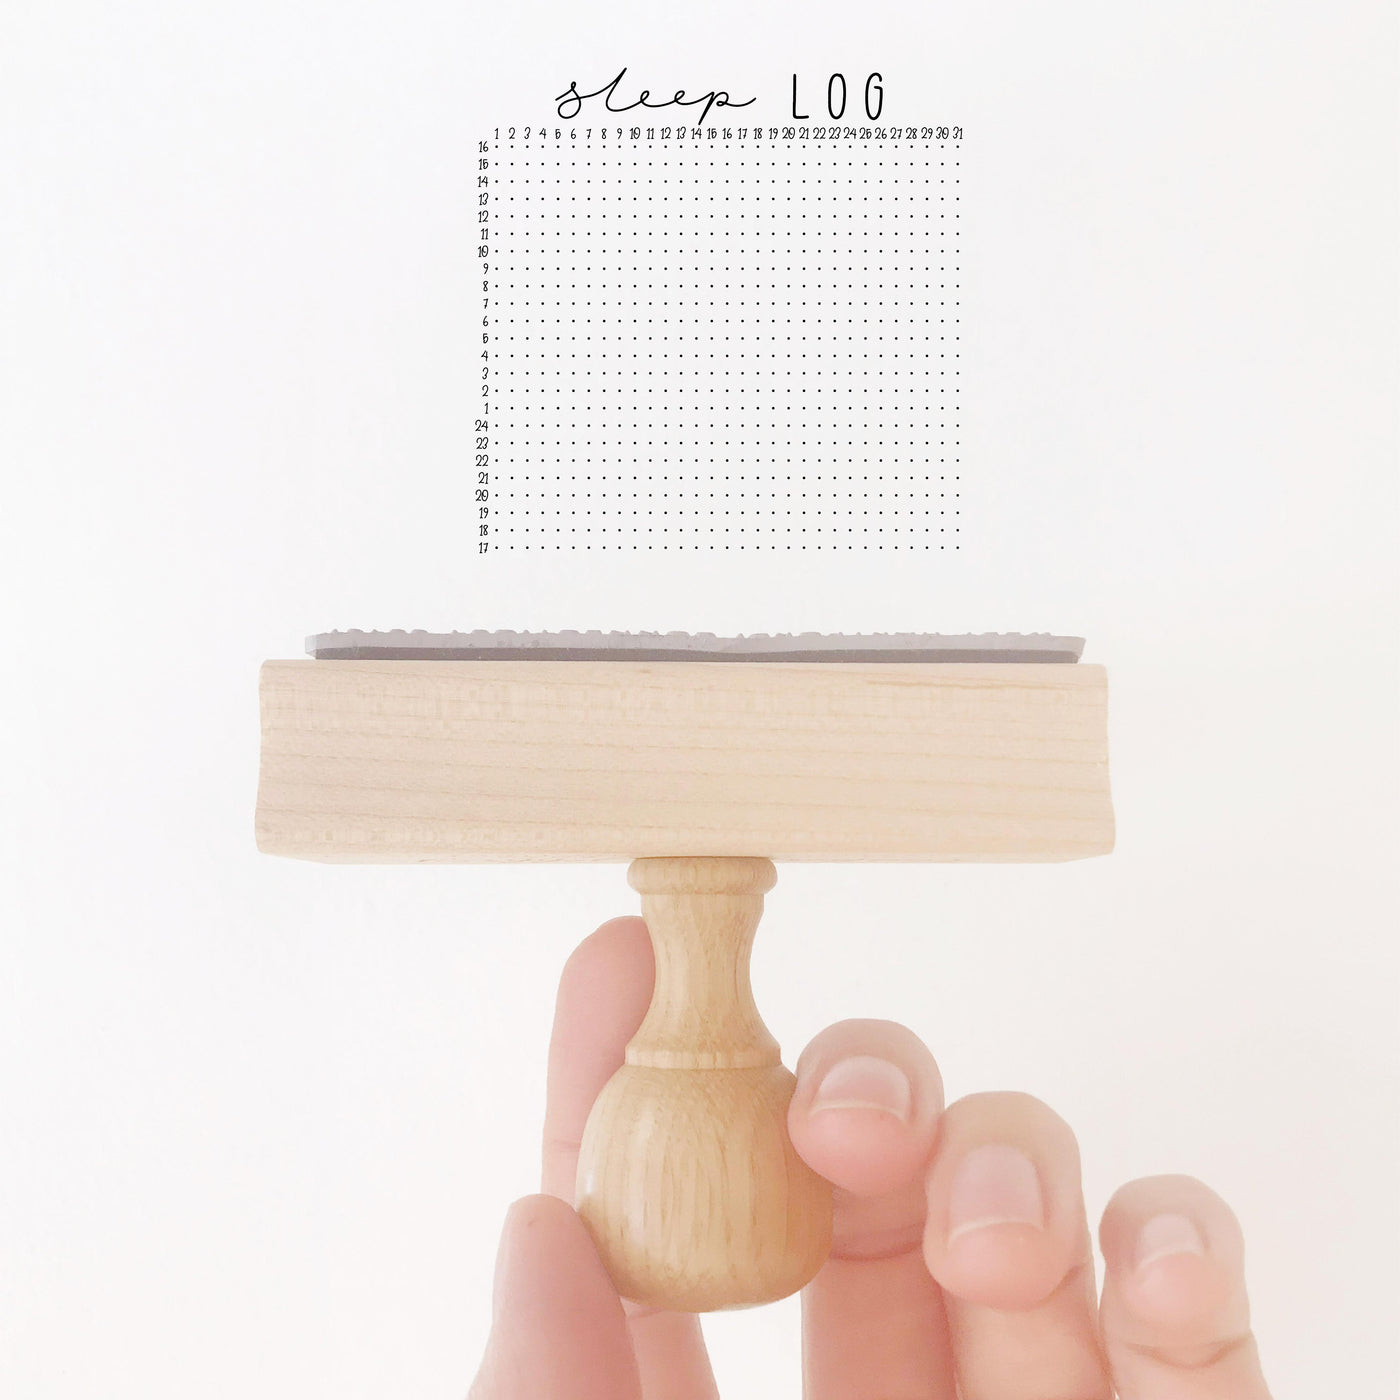 DOTTED SLEEP LOG RUBBER STAMP - JOURNAL